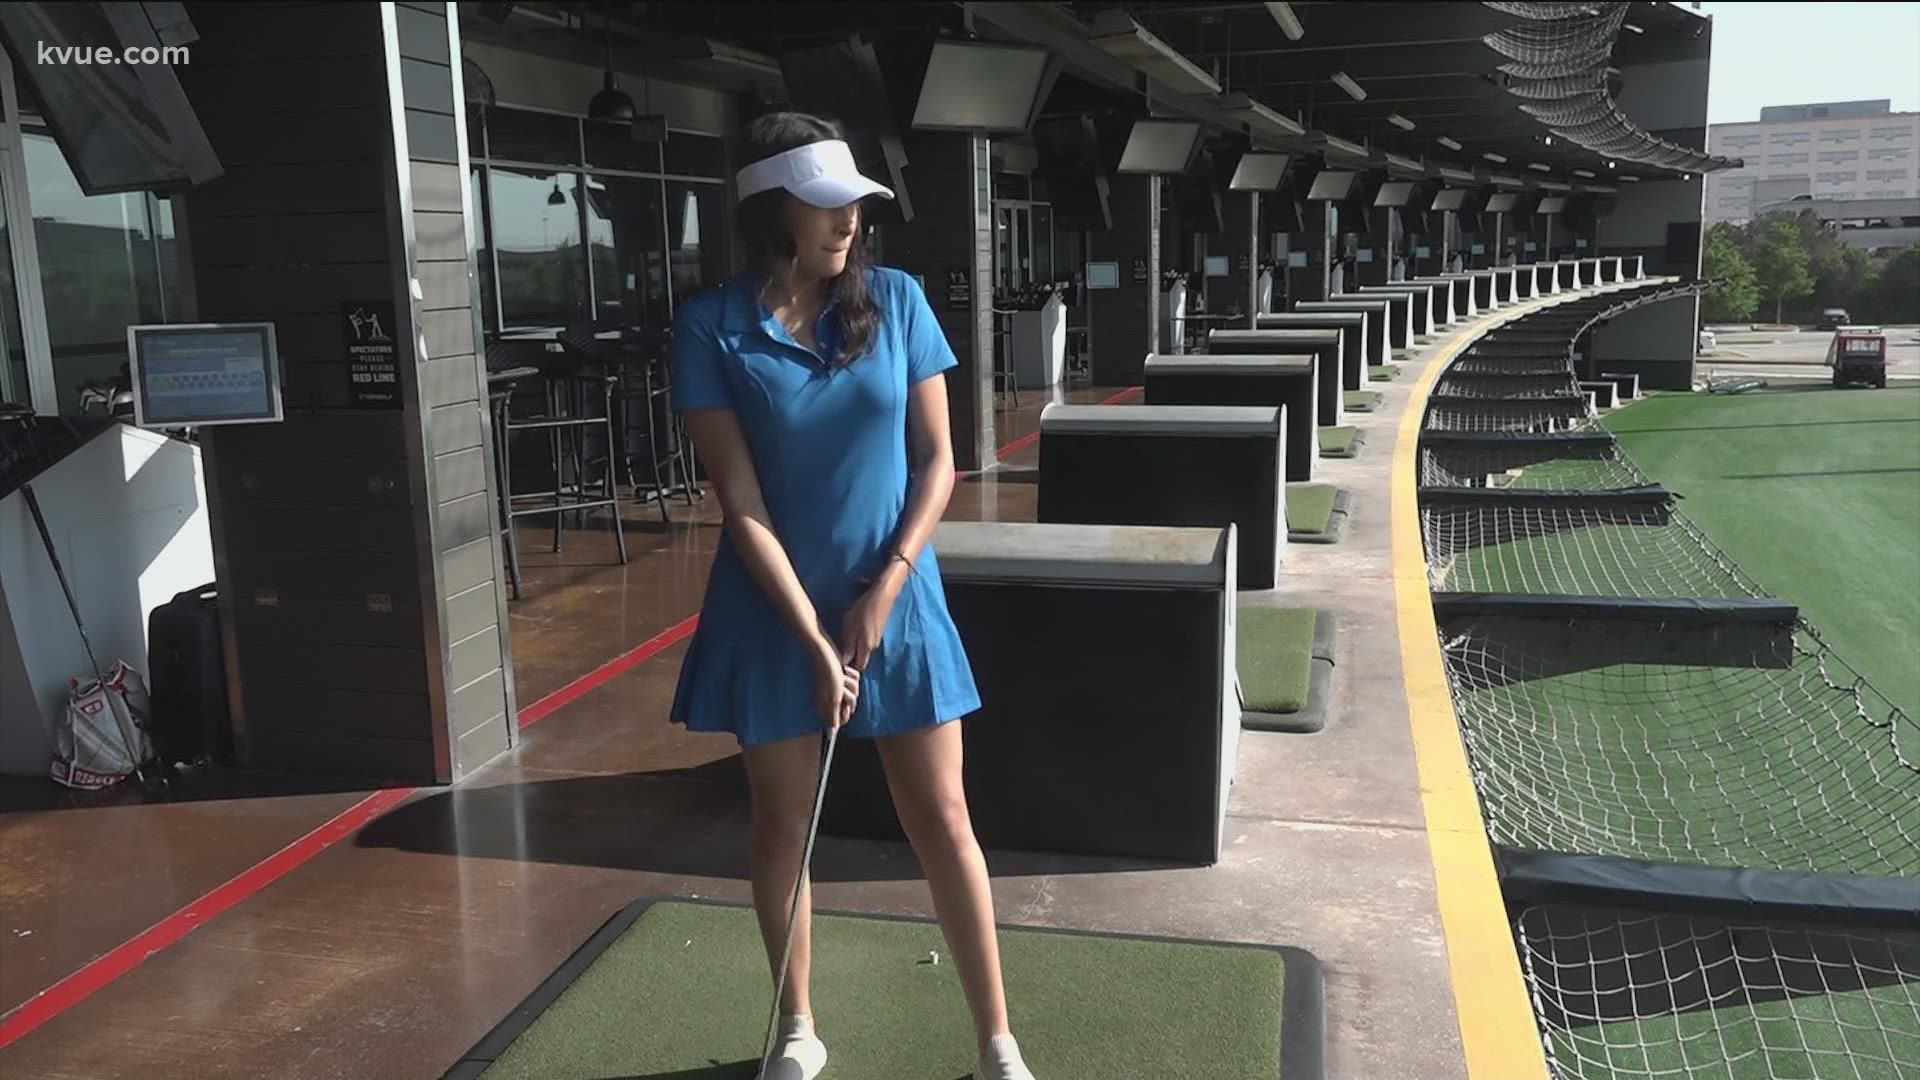 Golf is a sport that can be enjoyed by anyone at any age. For this Daybreak Adventures, Team Daybreak took a trip to Topgolf.